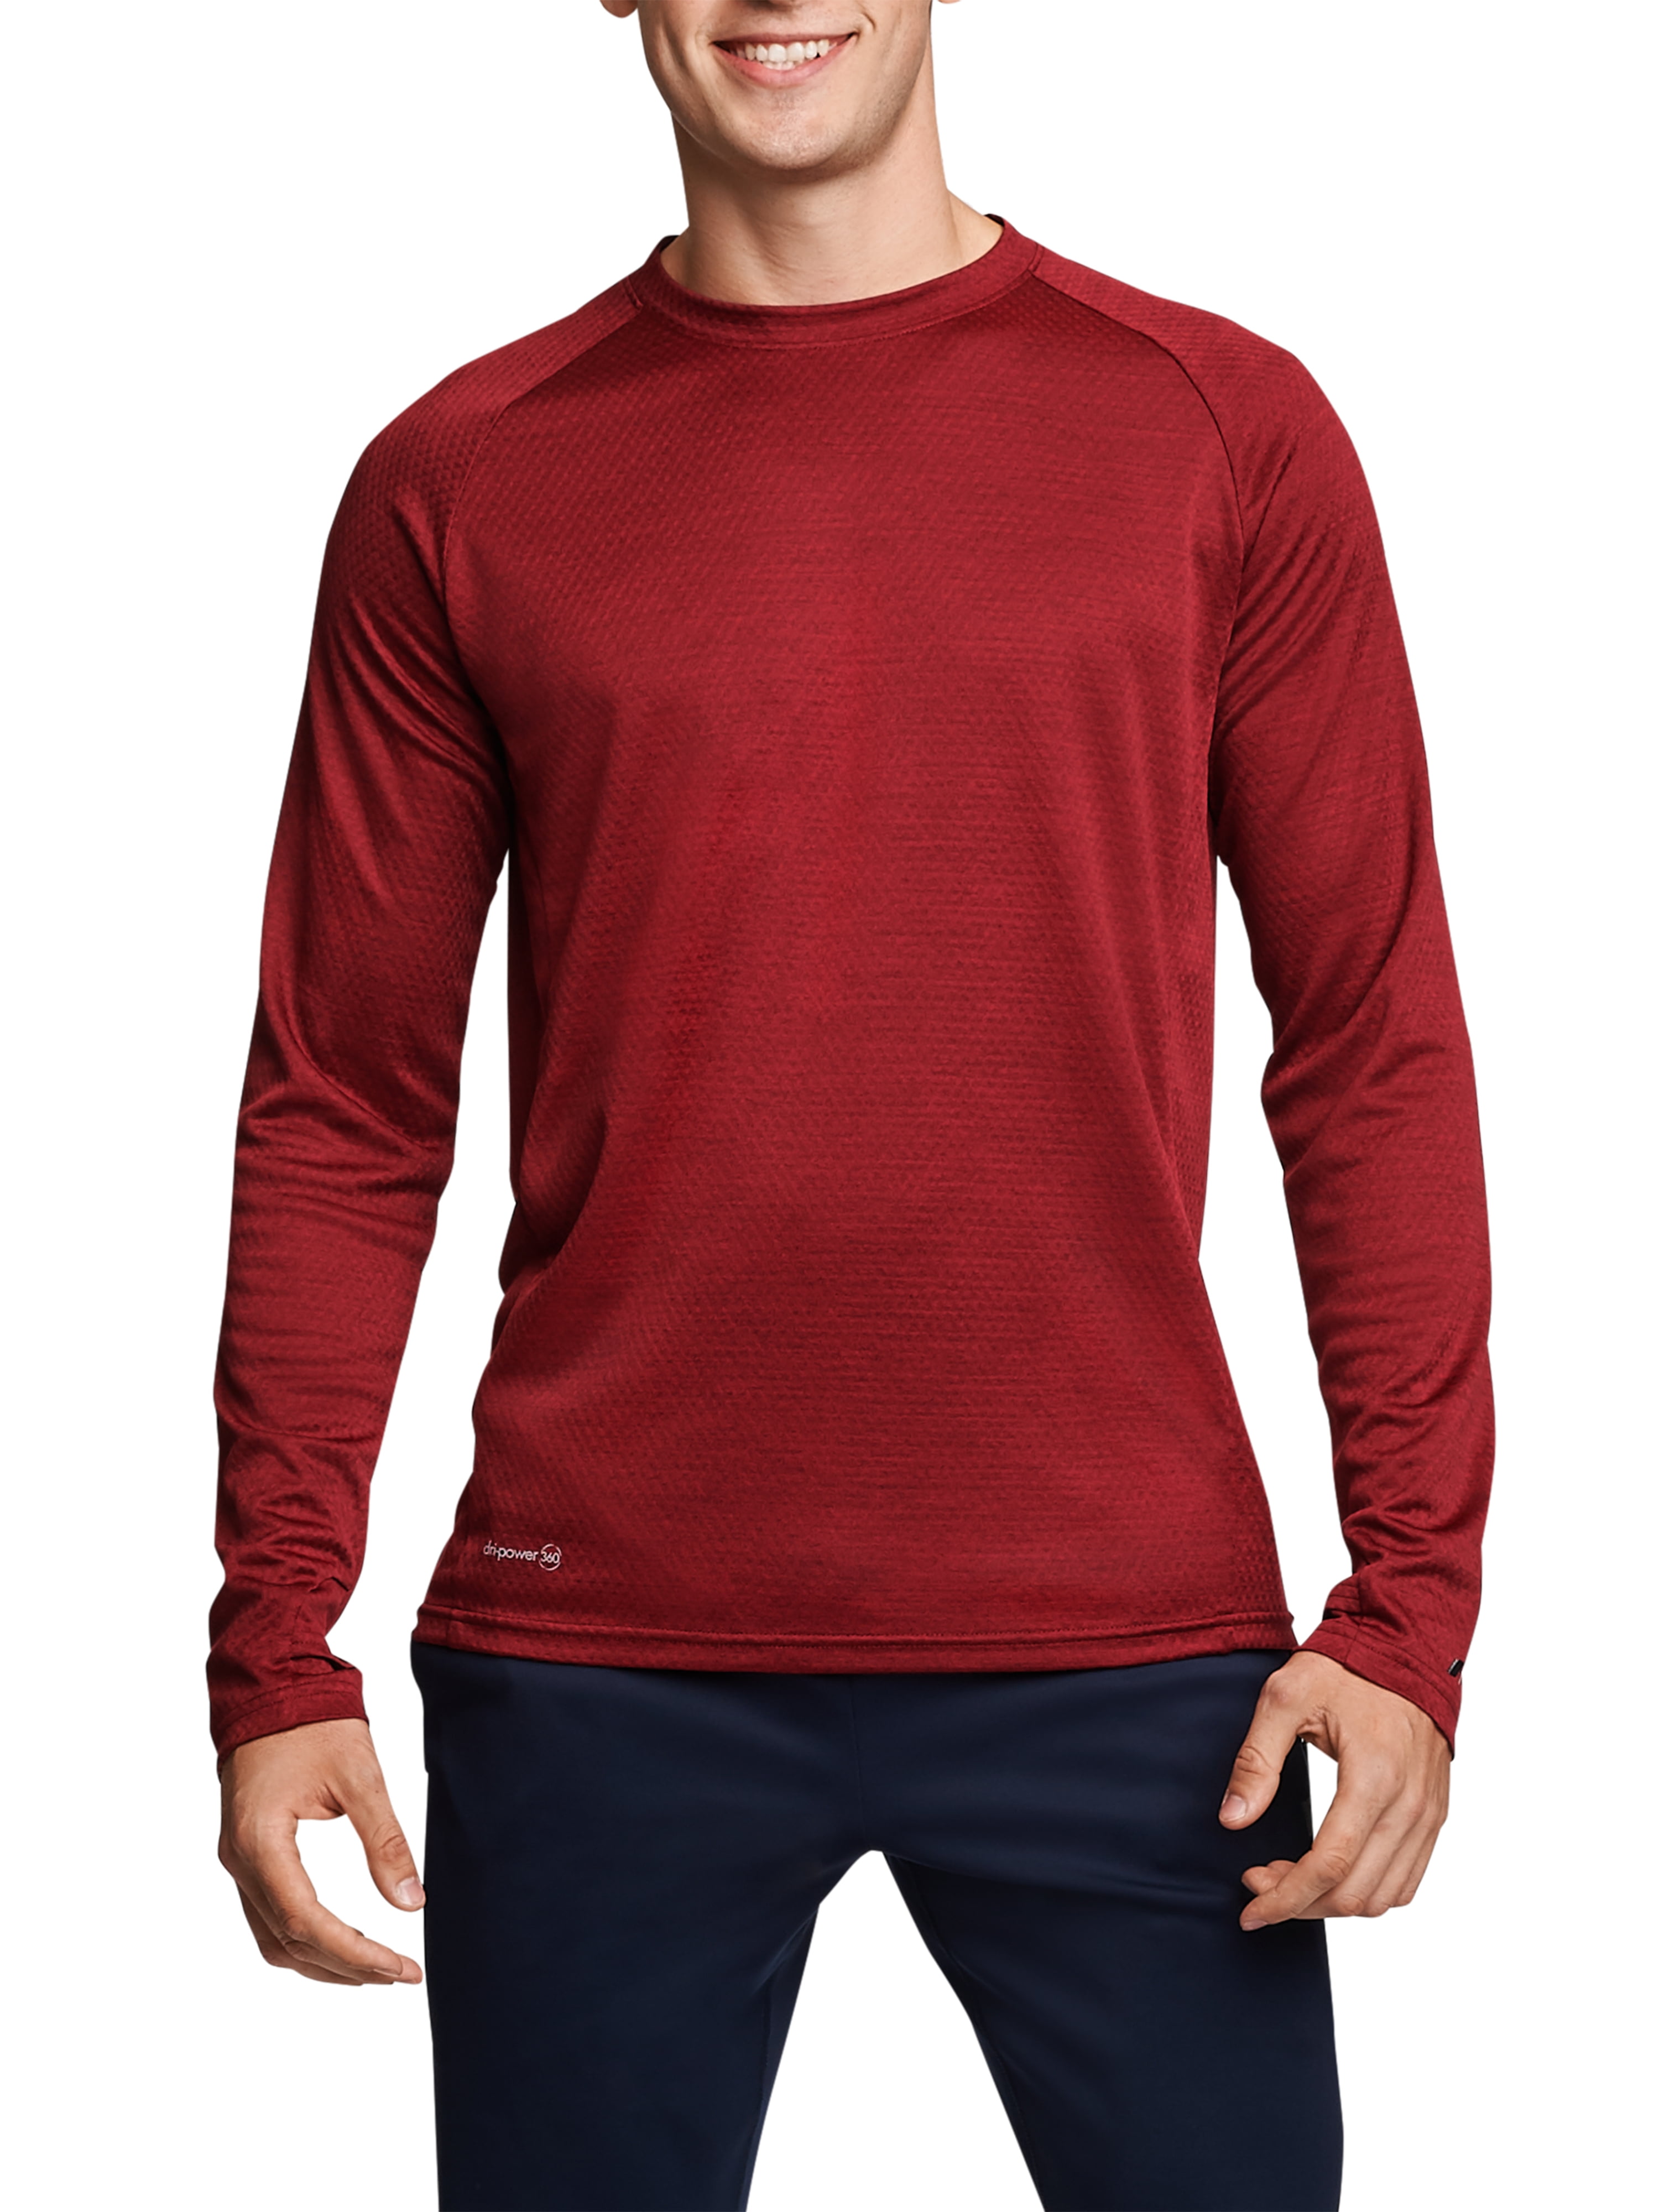 Russell Men's and Big Men's Long Sleeve Performance Tee, up to Size 5XL ...